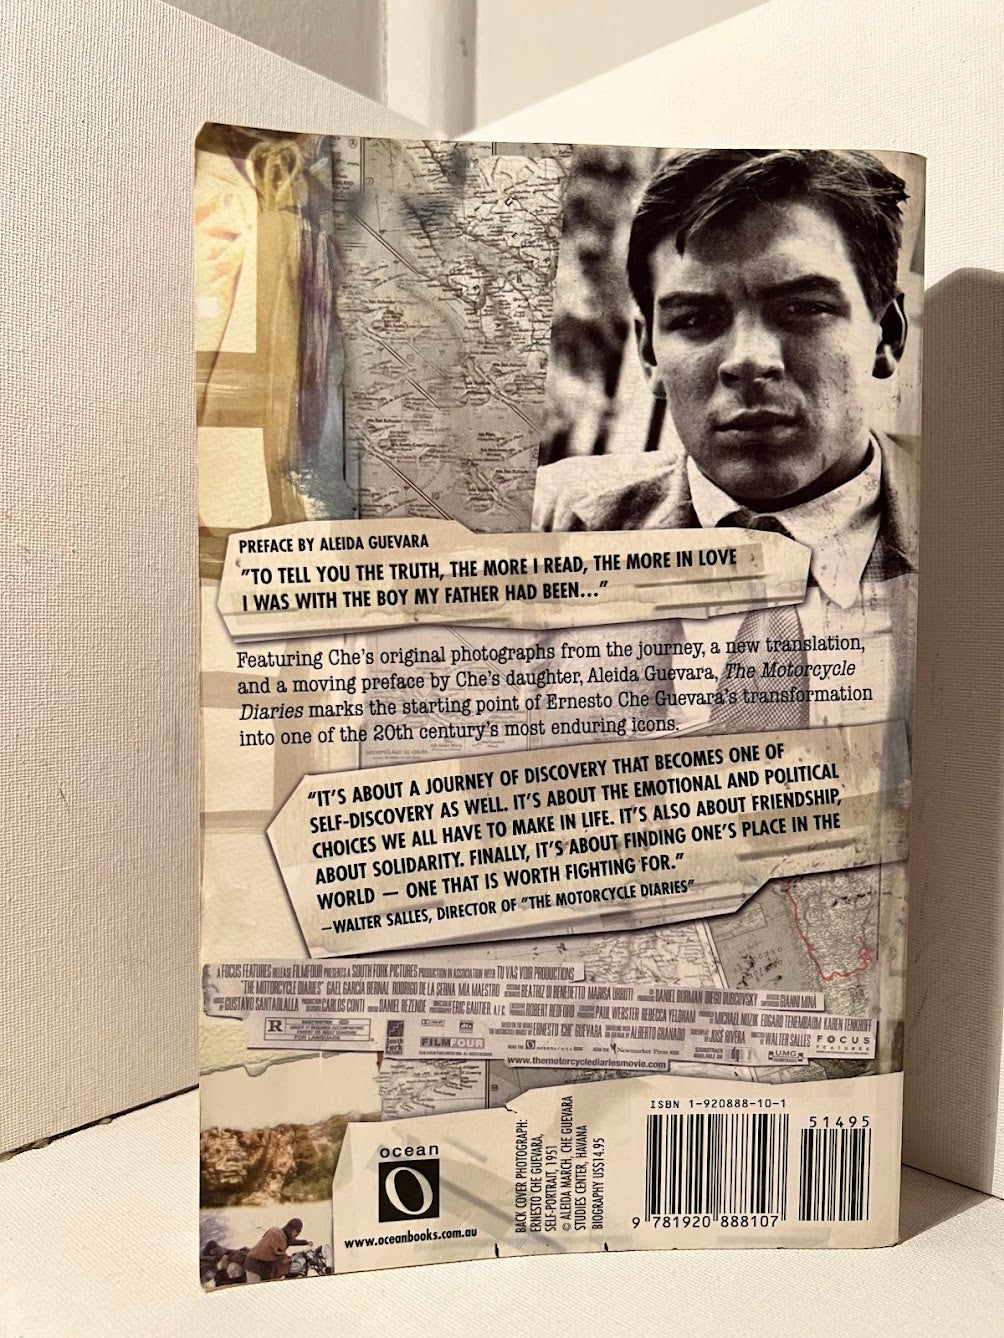 The Motorcycle Diaries by Ernesto Che Guevara